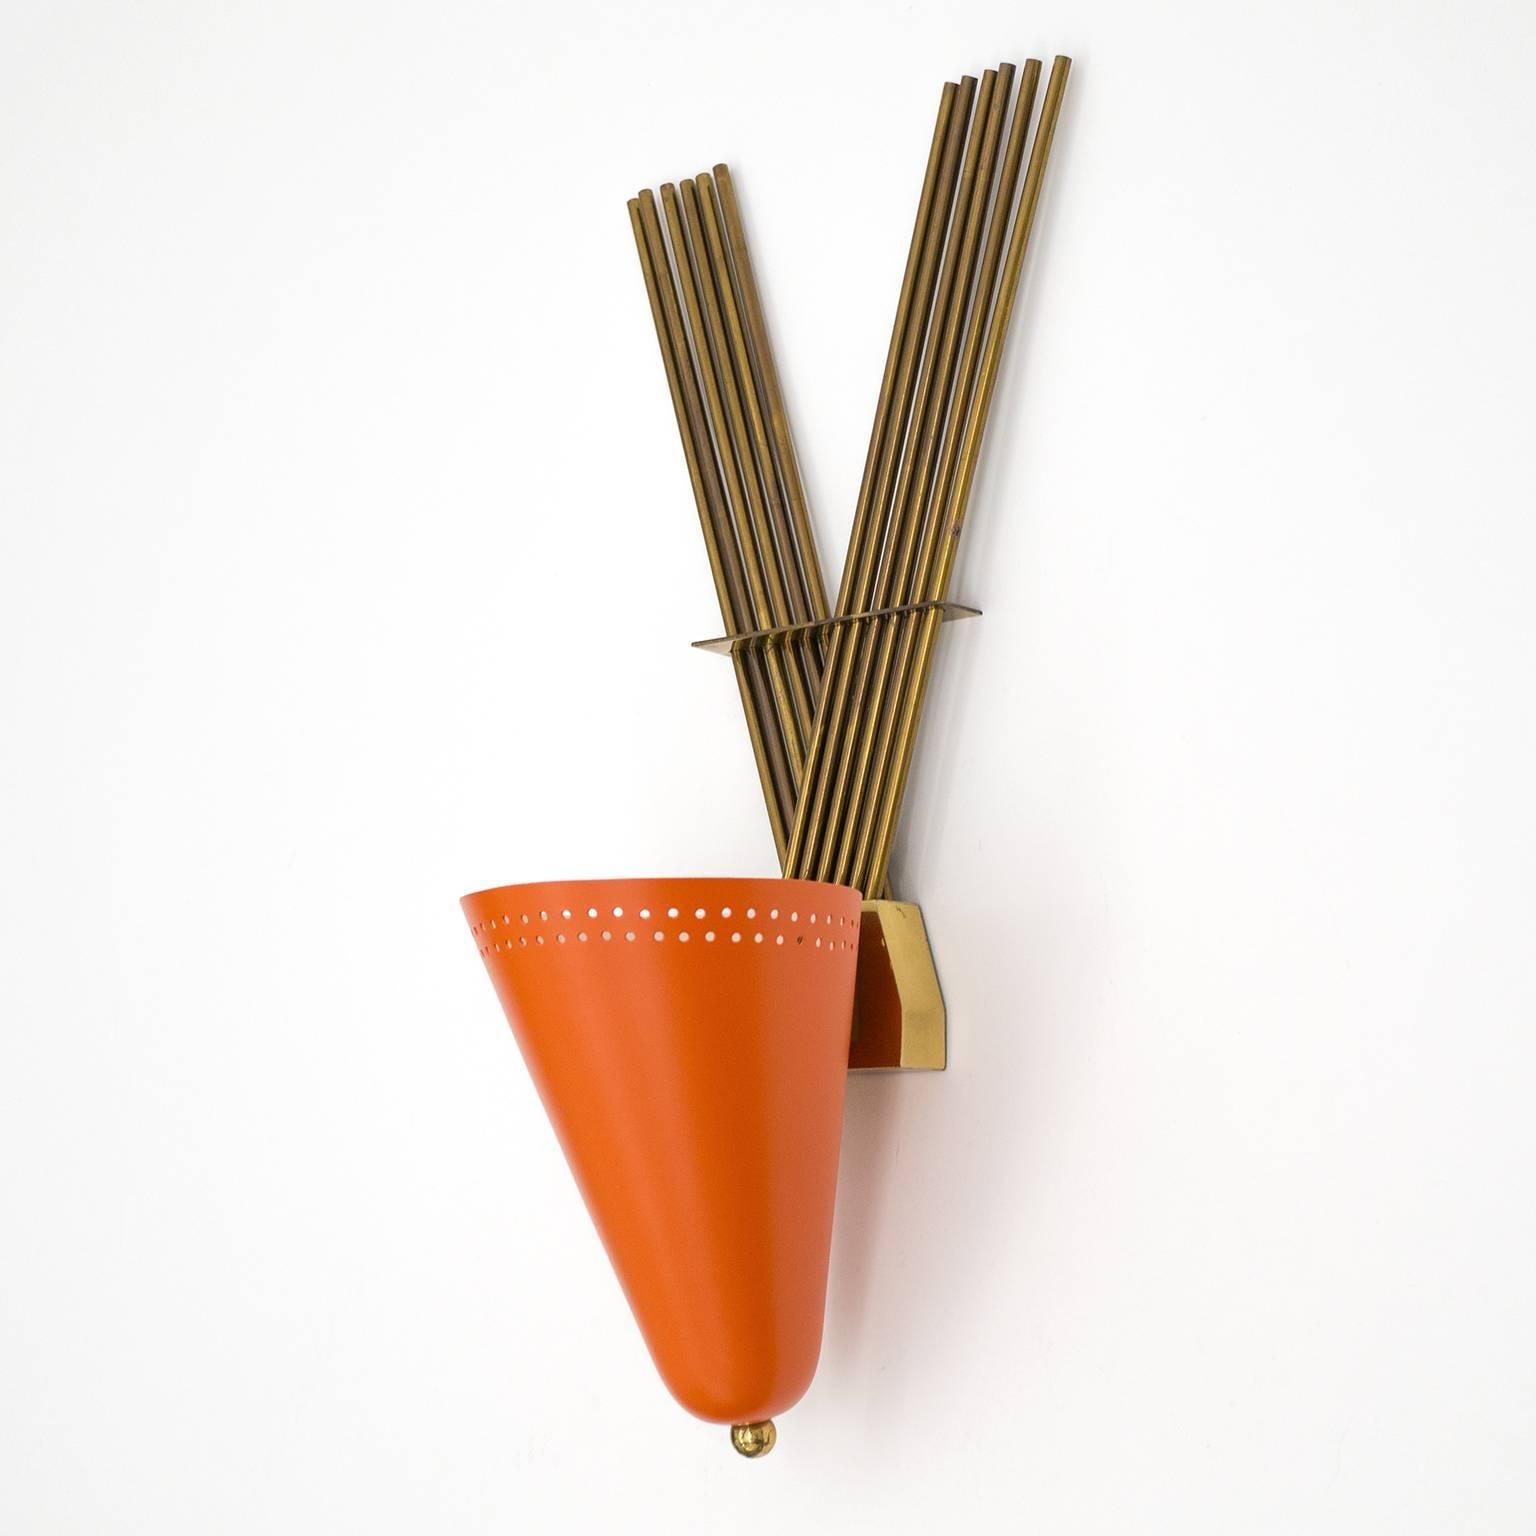 Highly unique large wall light from the 1950s. This unusual up-light features a large laquered and perforated aluminum cone against a backdrop of 12 brass rods arranged in a large 